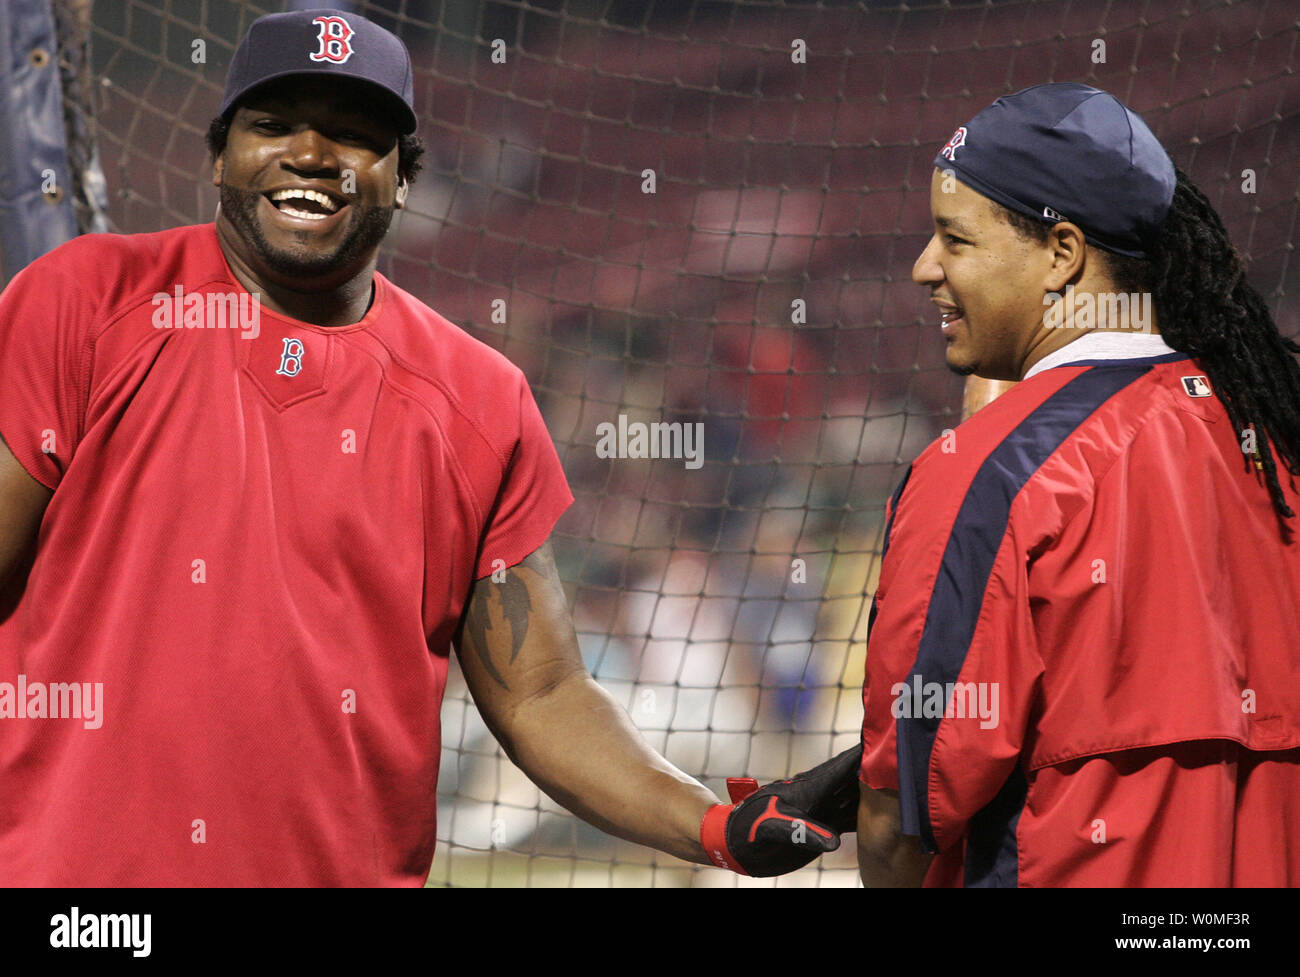 Boston Red Sox David Ortiz  confirmed a report on July 30, 2009 that he  tested positive for performance-enhancing drugs in 2003.  Teammate at the time Manny Ramirez  was also implicated.   Both sluggers guided the Boston Red Sox to World Series victories in 2004 and 2007.  In this file photo, Ortiz (L) jokes around with left fielder Manny Ramirez before the start of game two of the American League Division Series against the Los Angeles Angels at Fenway Park in Boston on October 5, 2007.  UPI Photo/Matthew Healey/Files Stock Photo